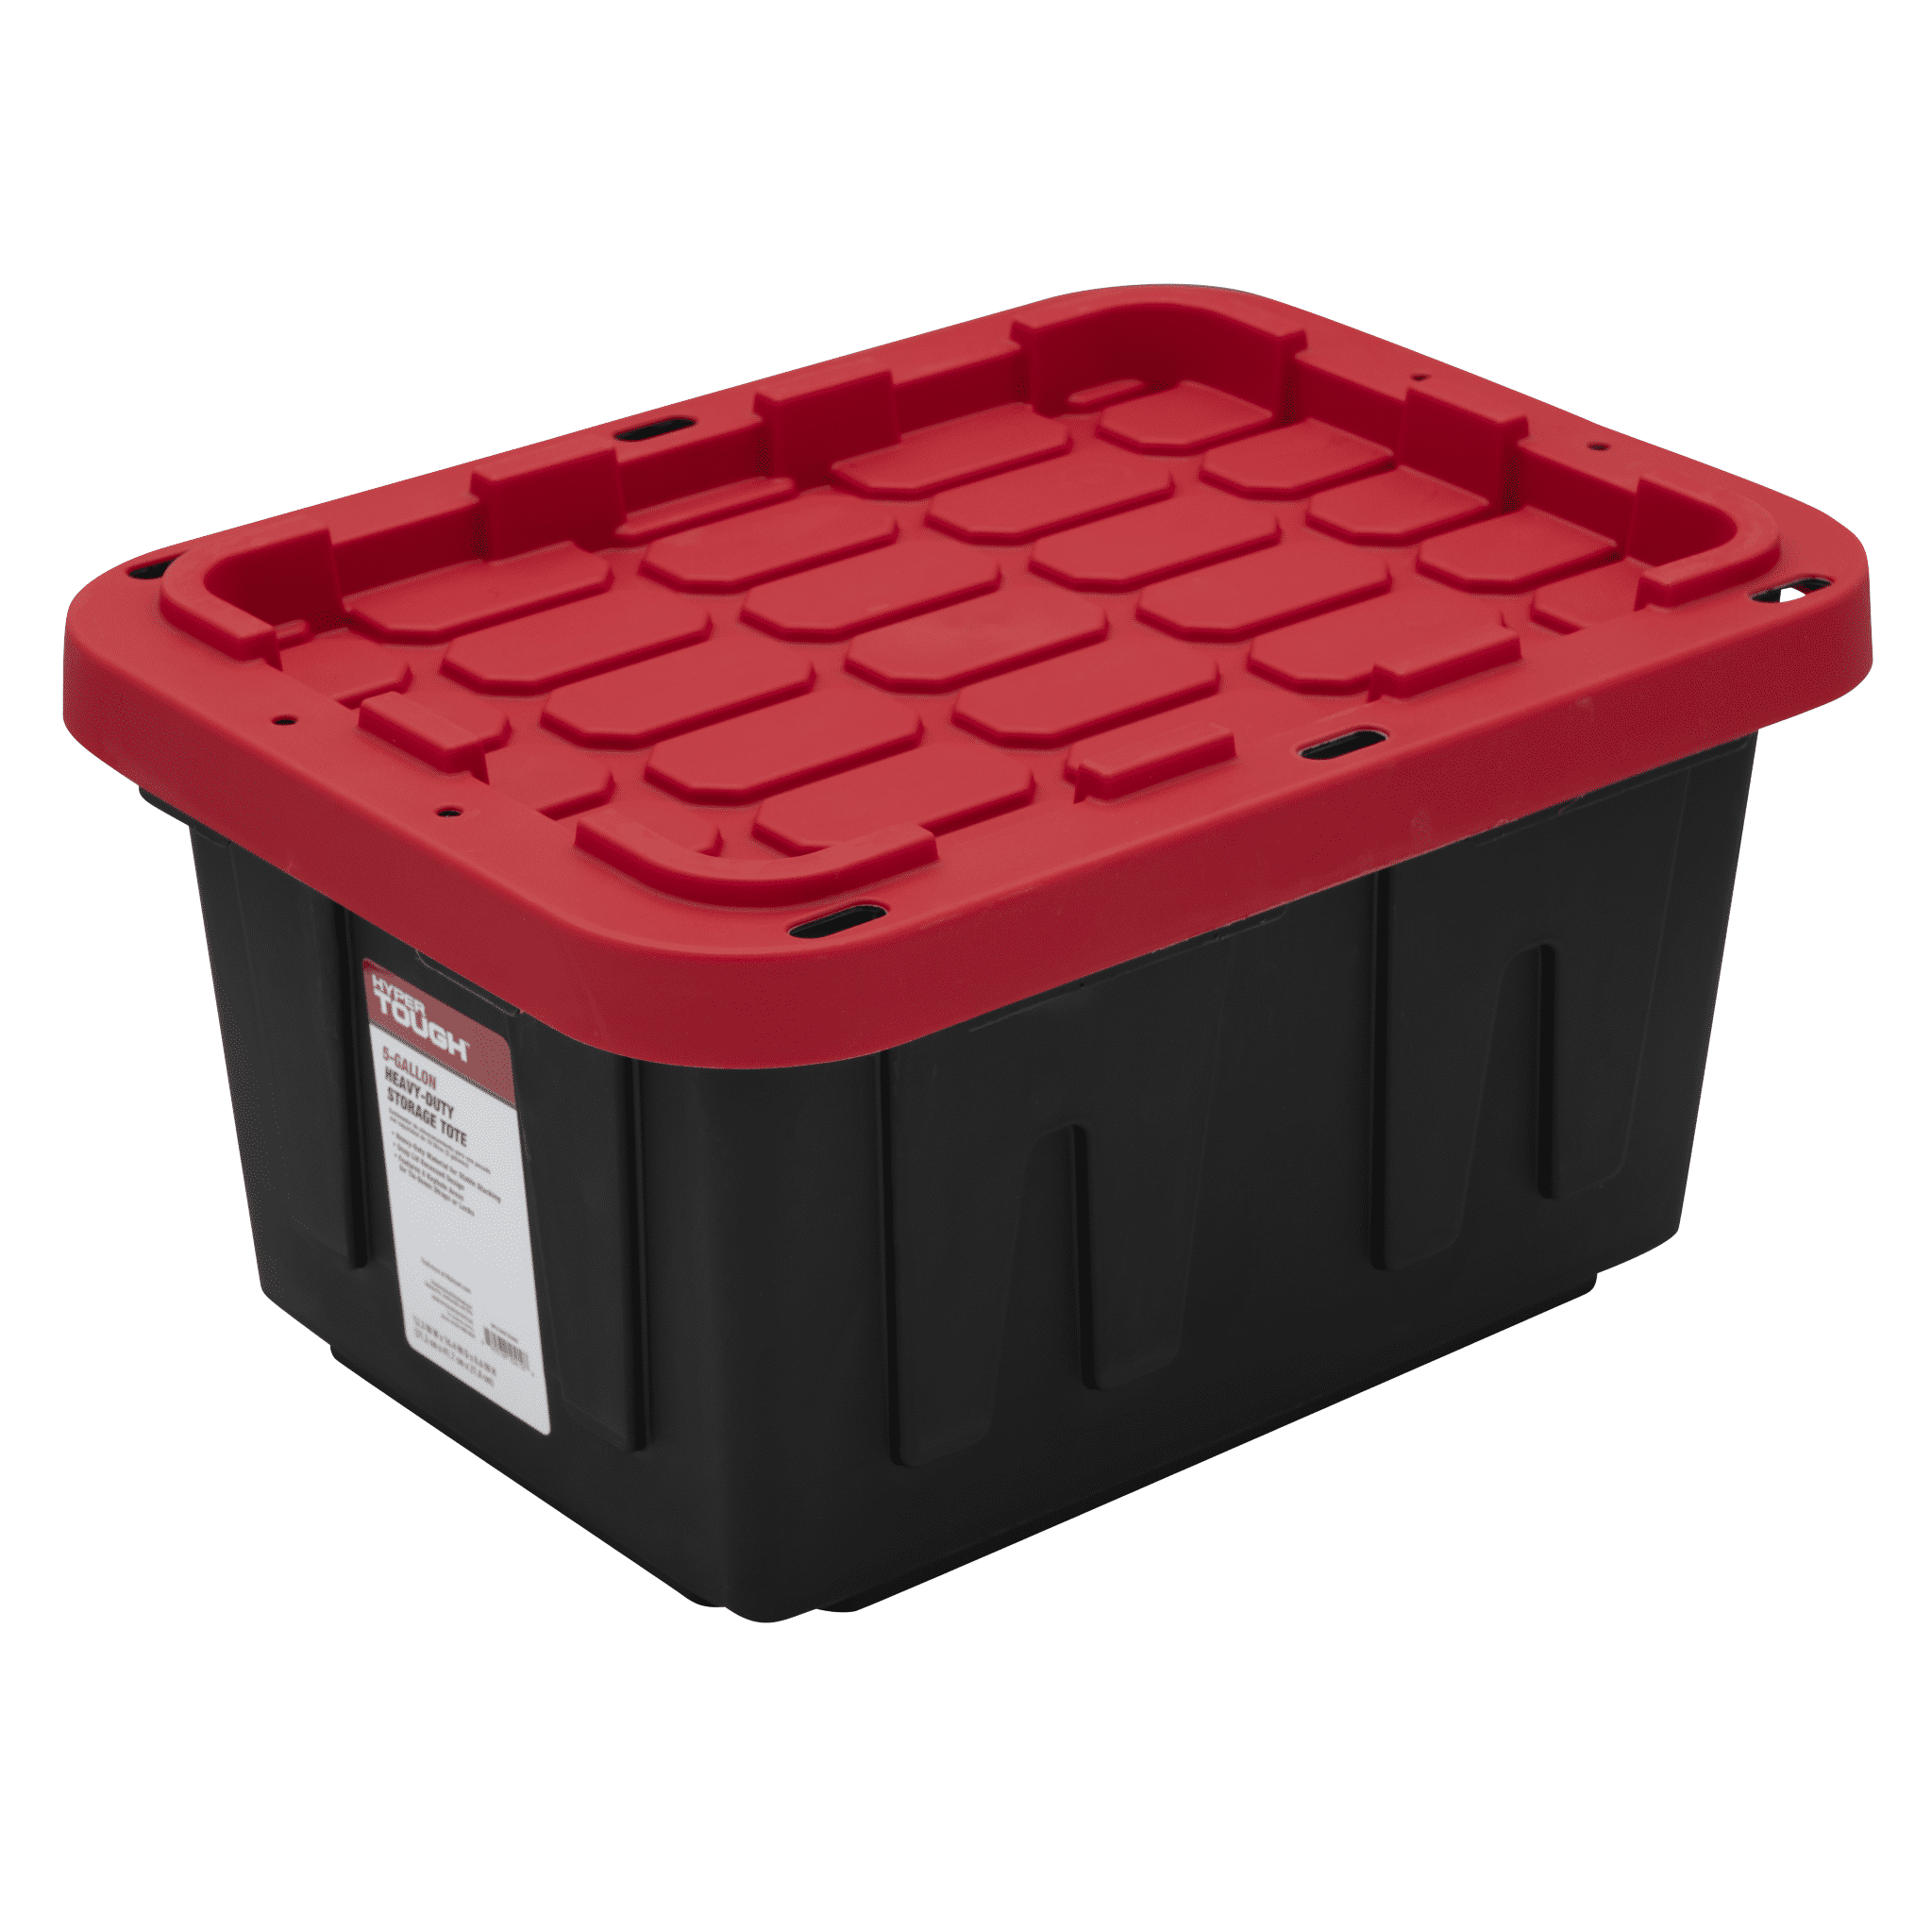 Hyper Tough 5 Gallon Snap Lid Storage Bin Container, Black with Red Lid